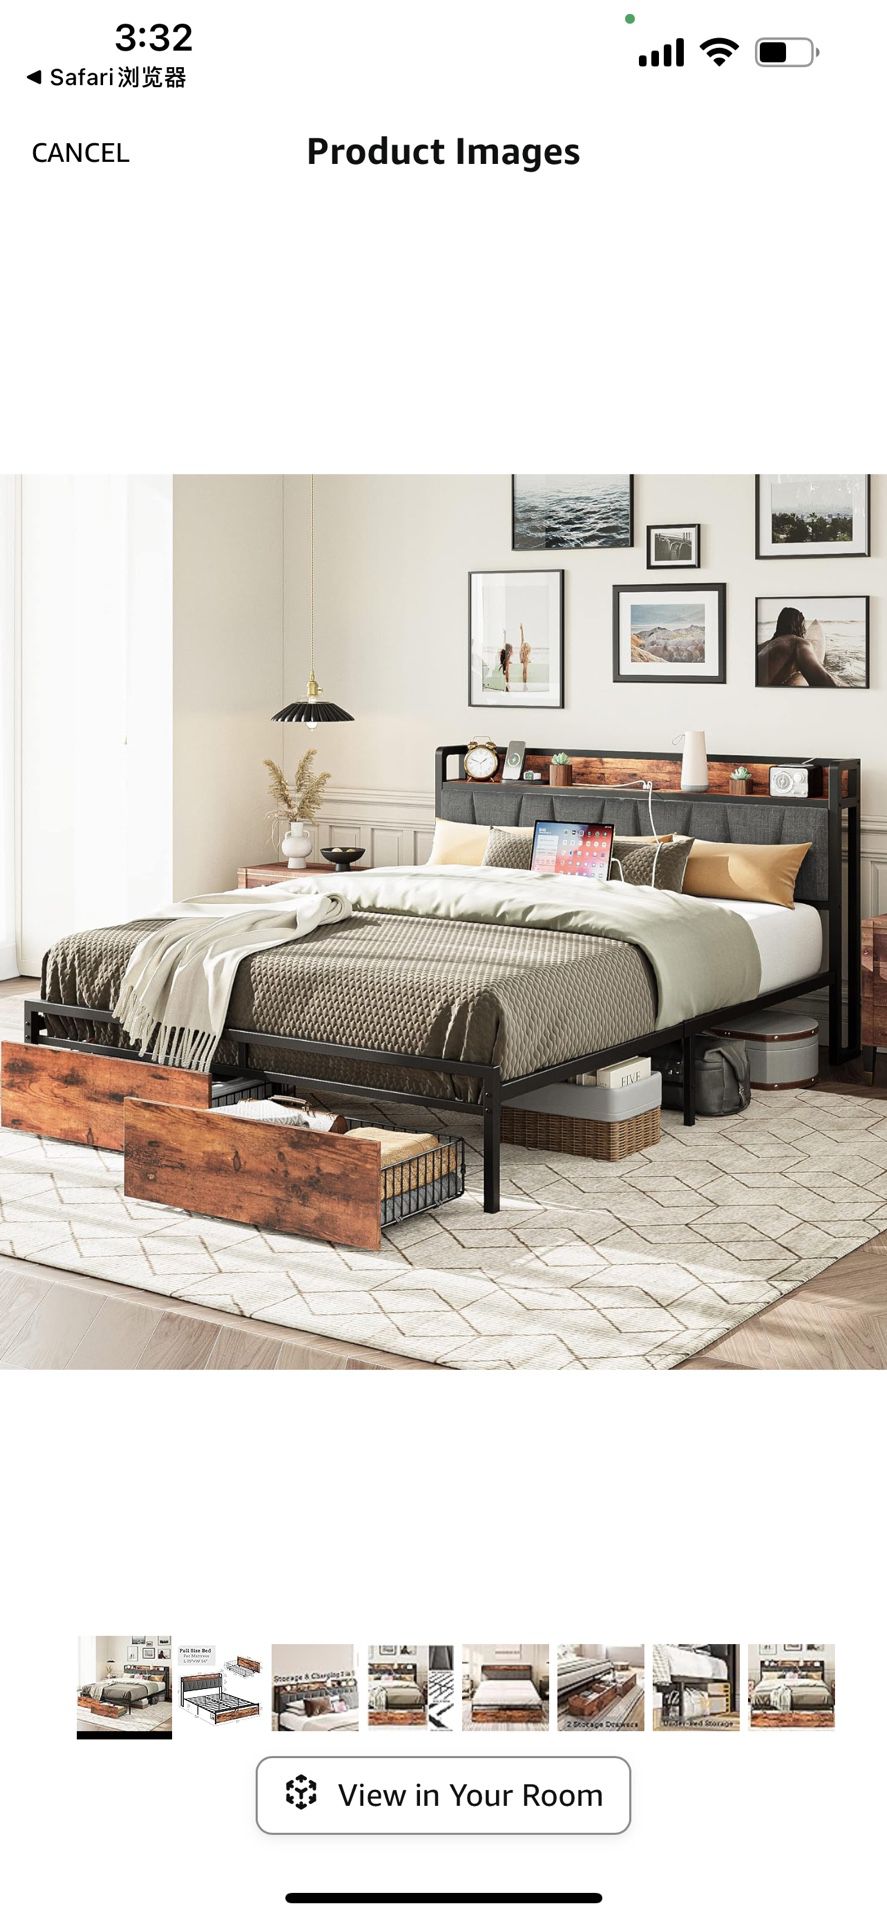 New in box  Full Size Bed Frame, Storage Headboard with Charging Station, Platform Bed with Drawers, No Box Spring Needed, Easy Assembly, Vintage Brow